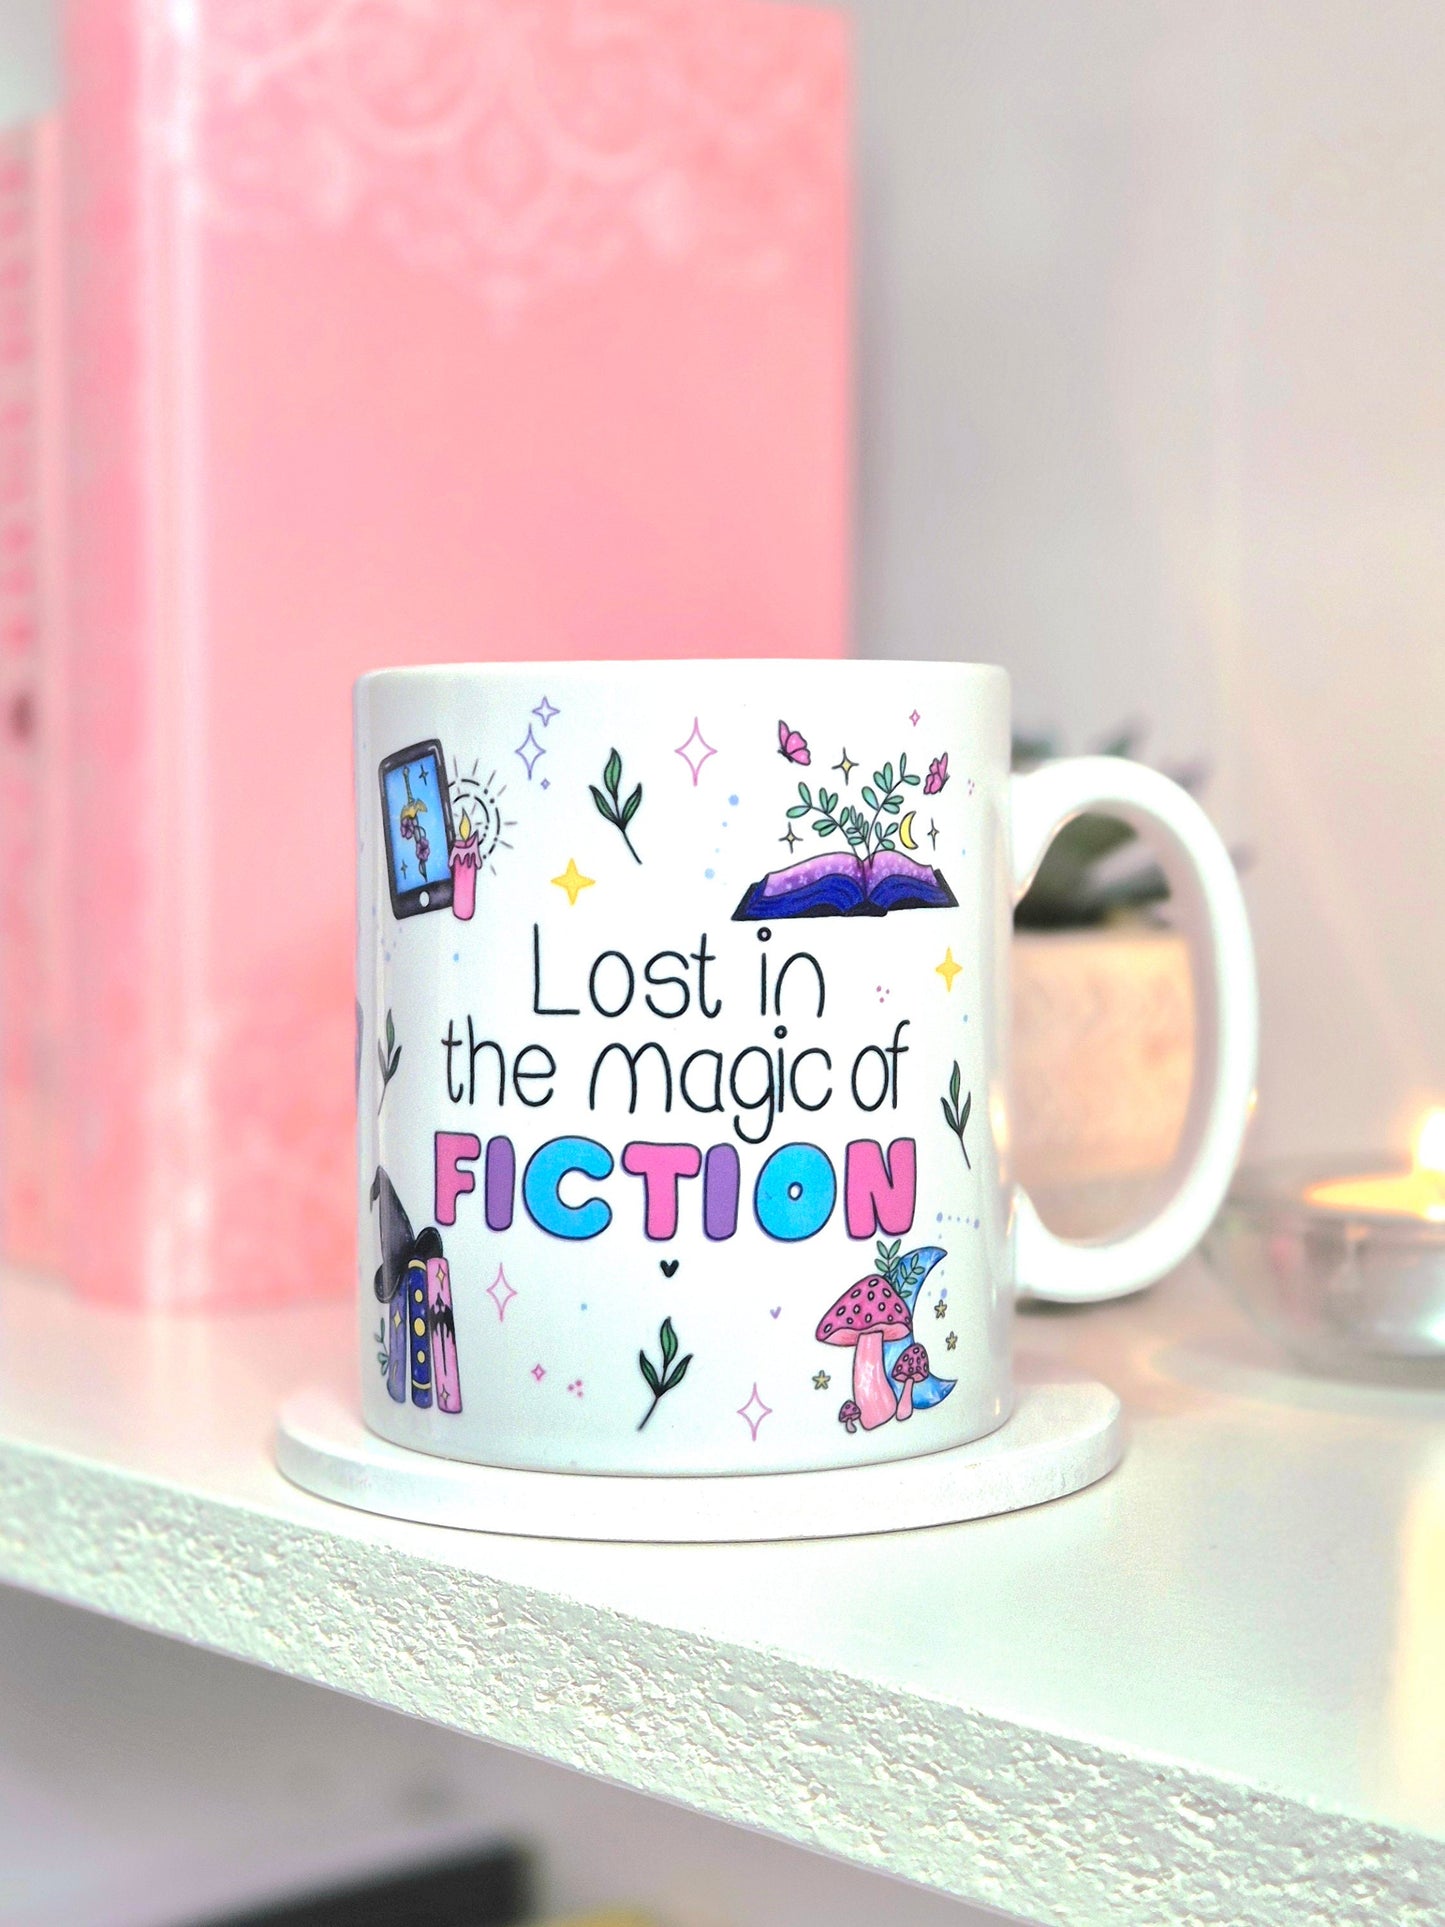 Lost in the magic of fiction mug